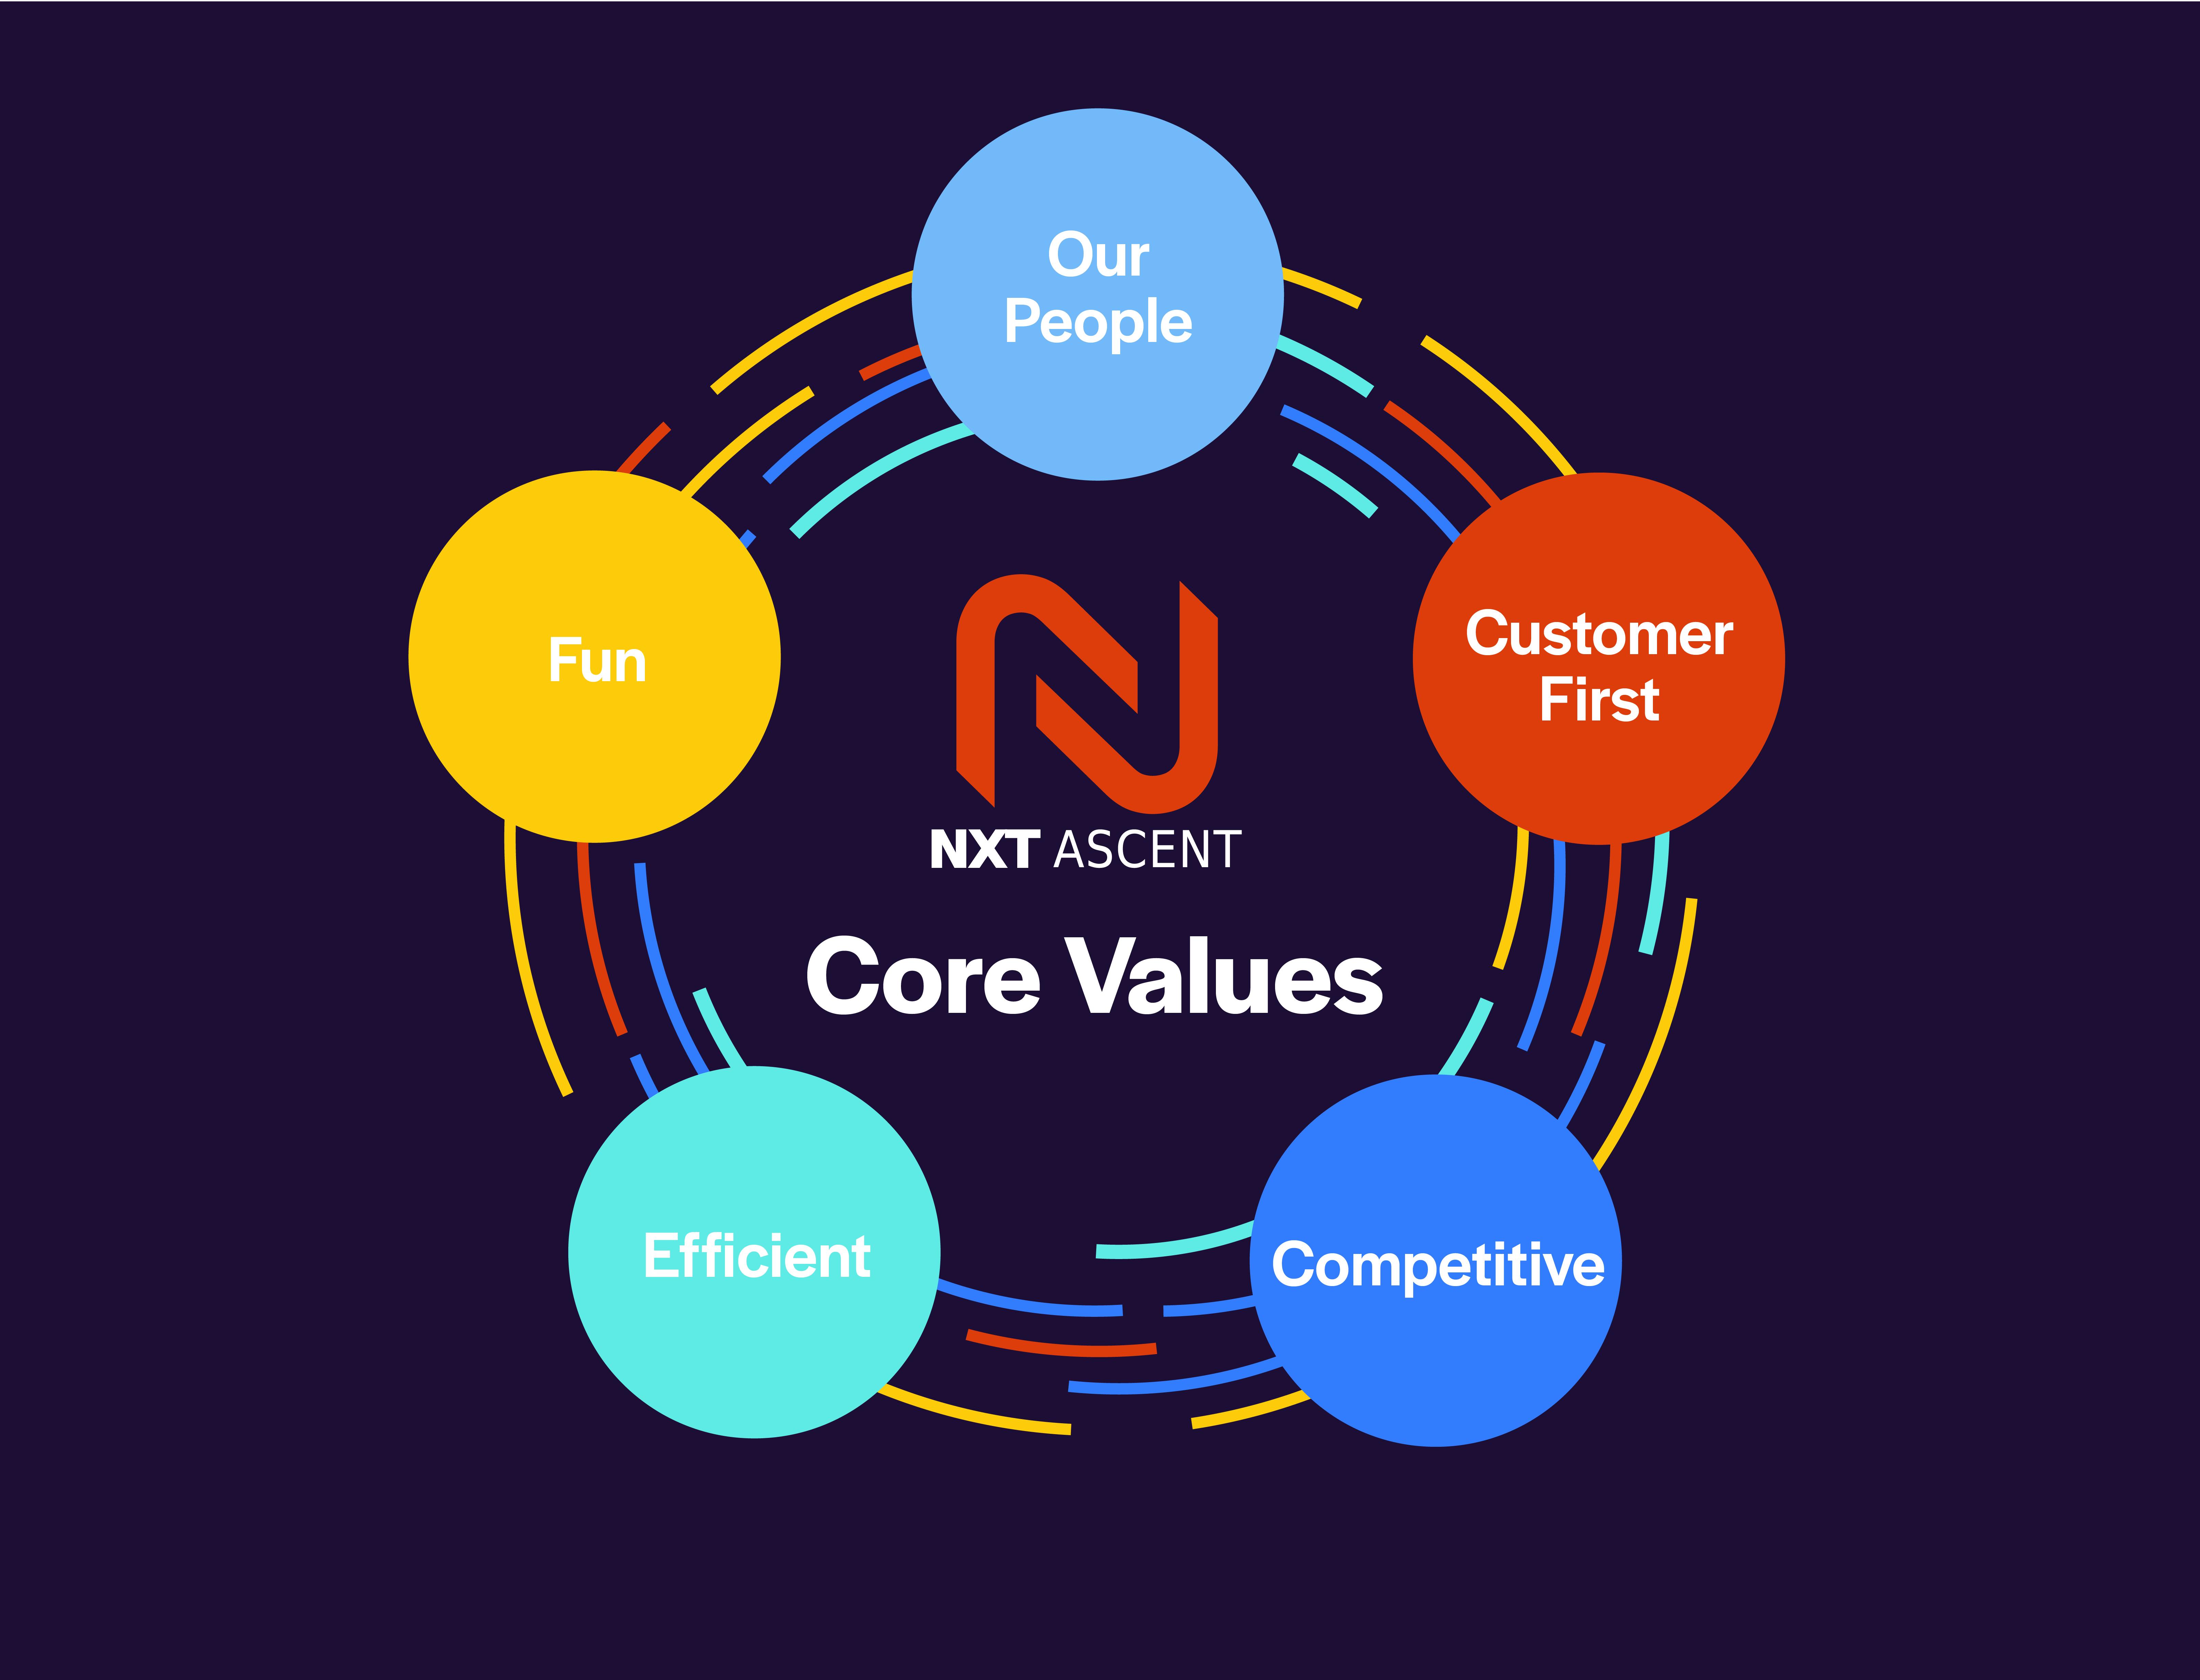 OUR NXT ASCENT VALUES